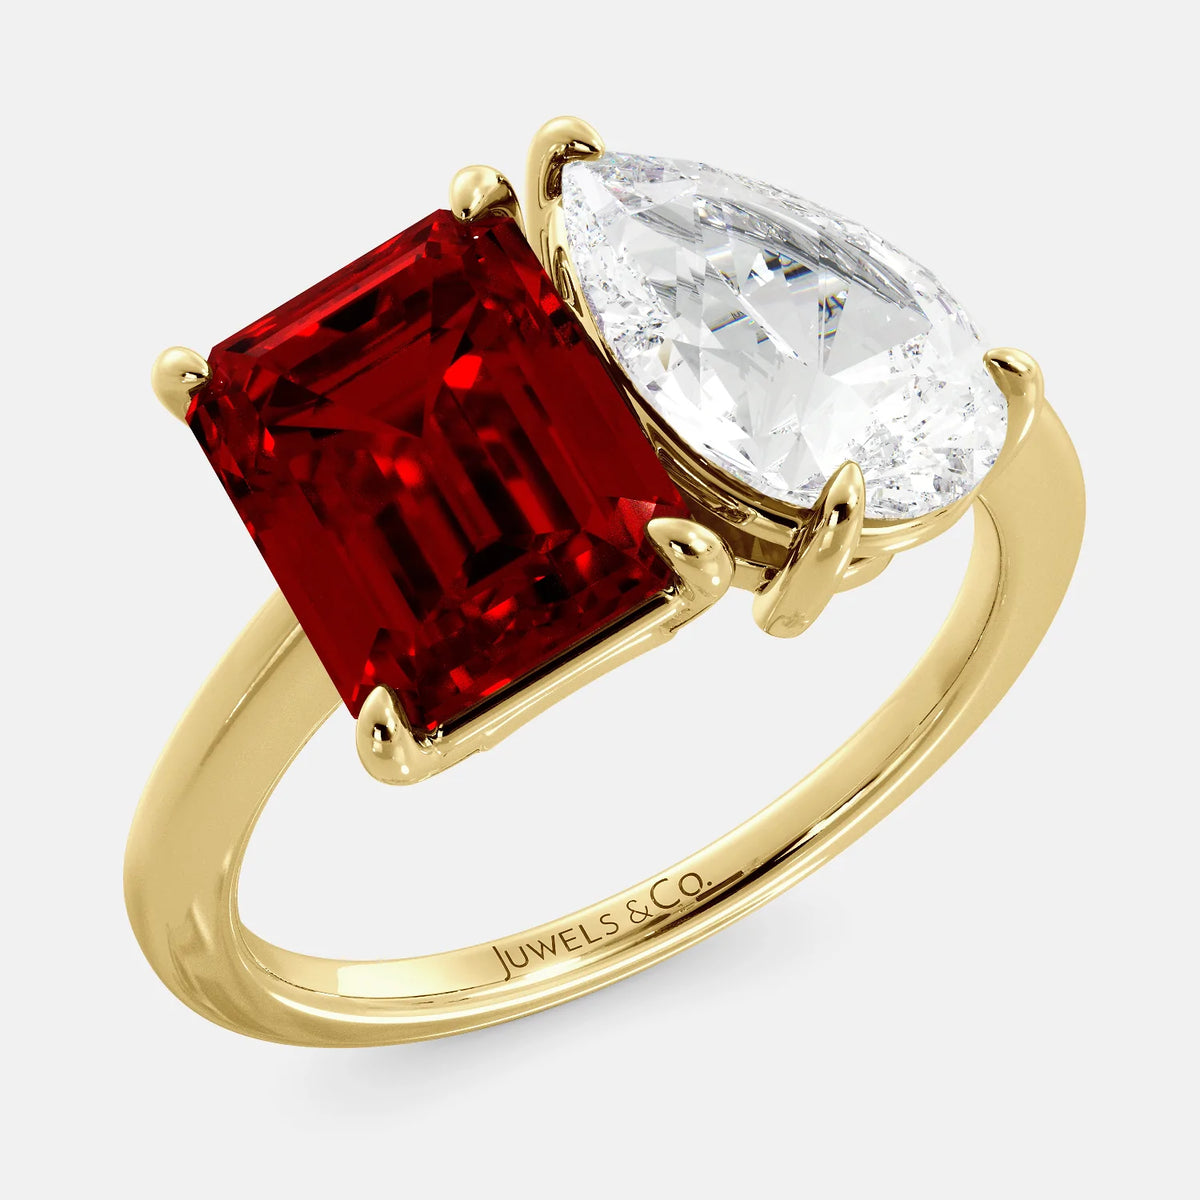 A toi et moi ring with a ruby stone in emerald cut and a pear-shaped stone. The ruby is a deep red color and the pear-shaped stone can be customized to represent the birth month stone of the wearer or a loved one. The ring is made of 14k gold and is available in all sizes. This ring is a perfect gift for any occasion, and it can be customized to make it truly unique